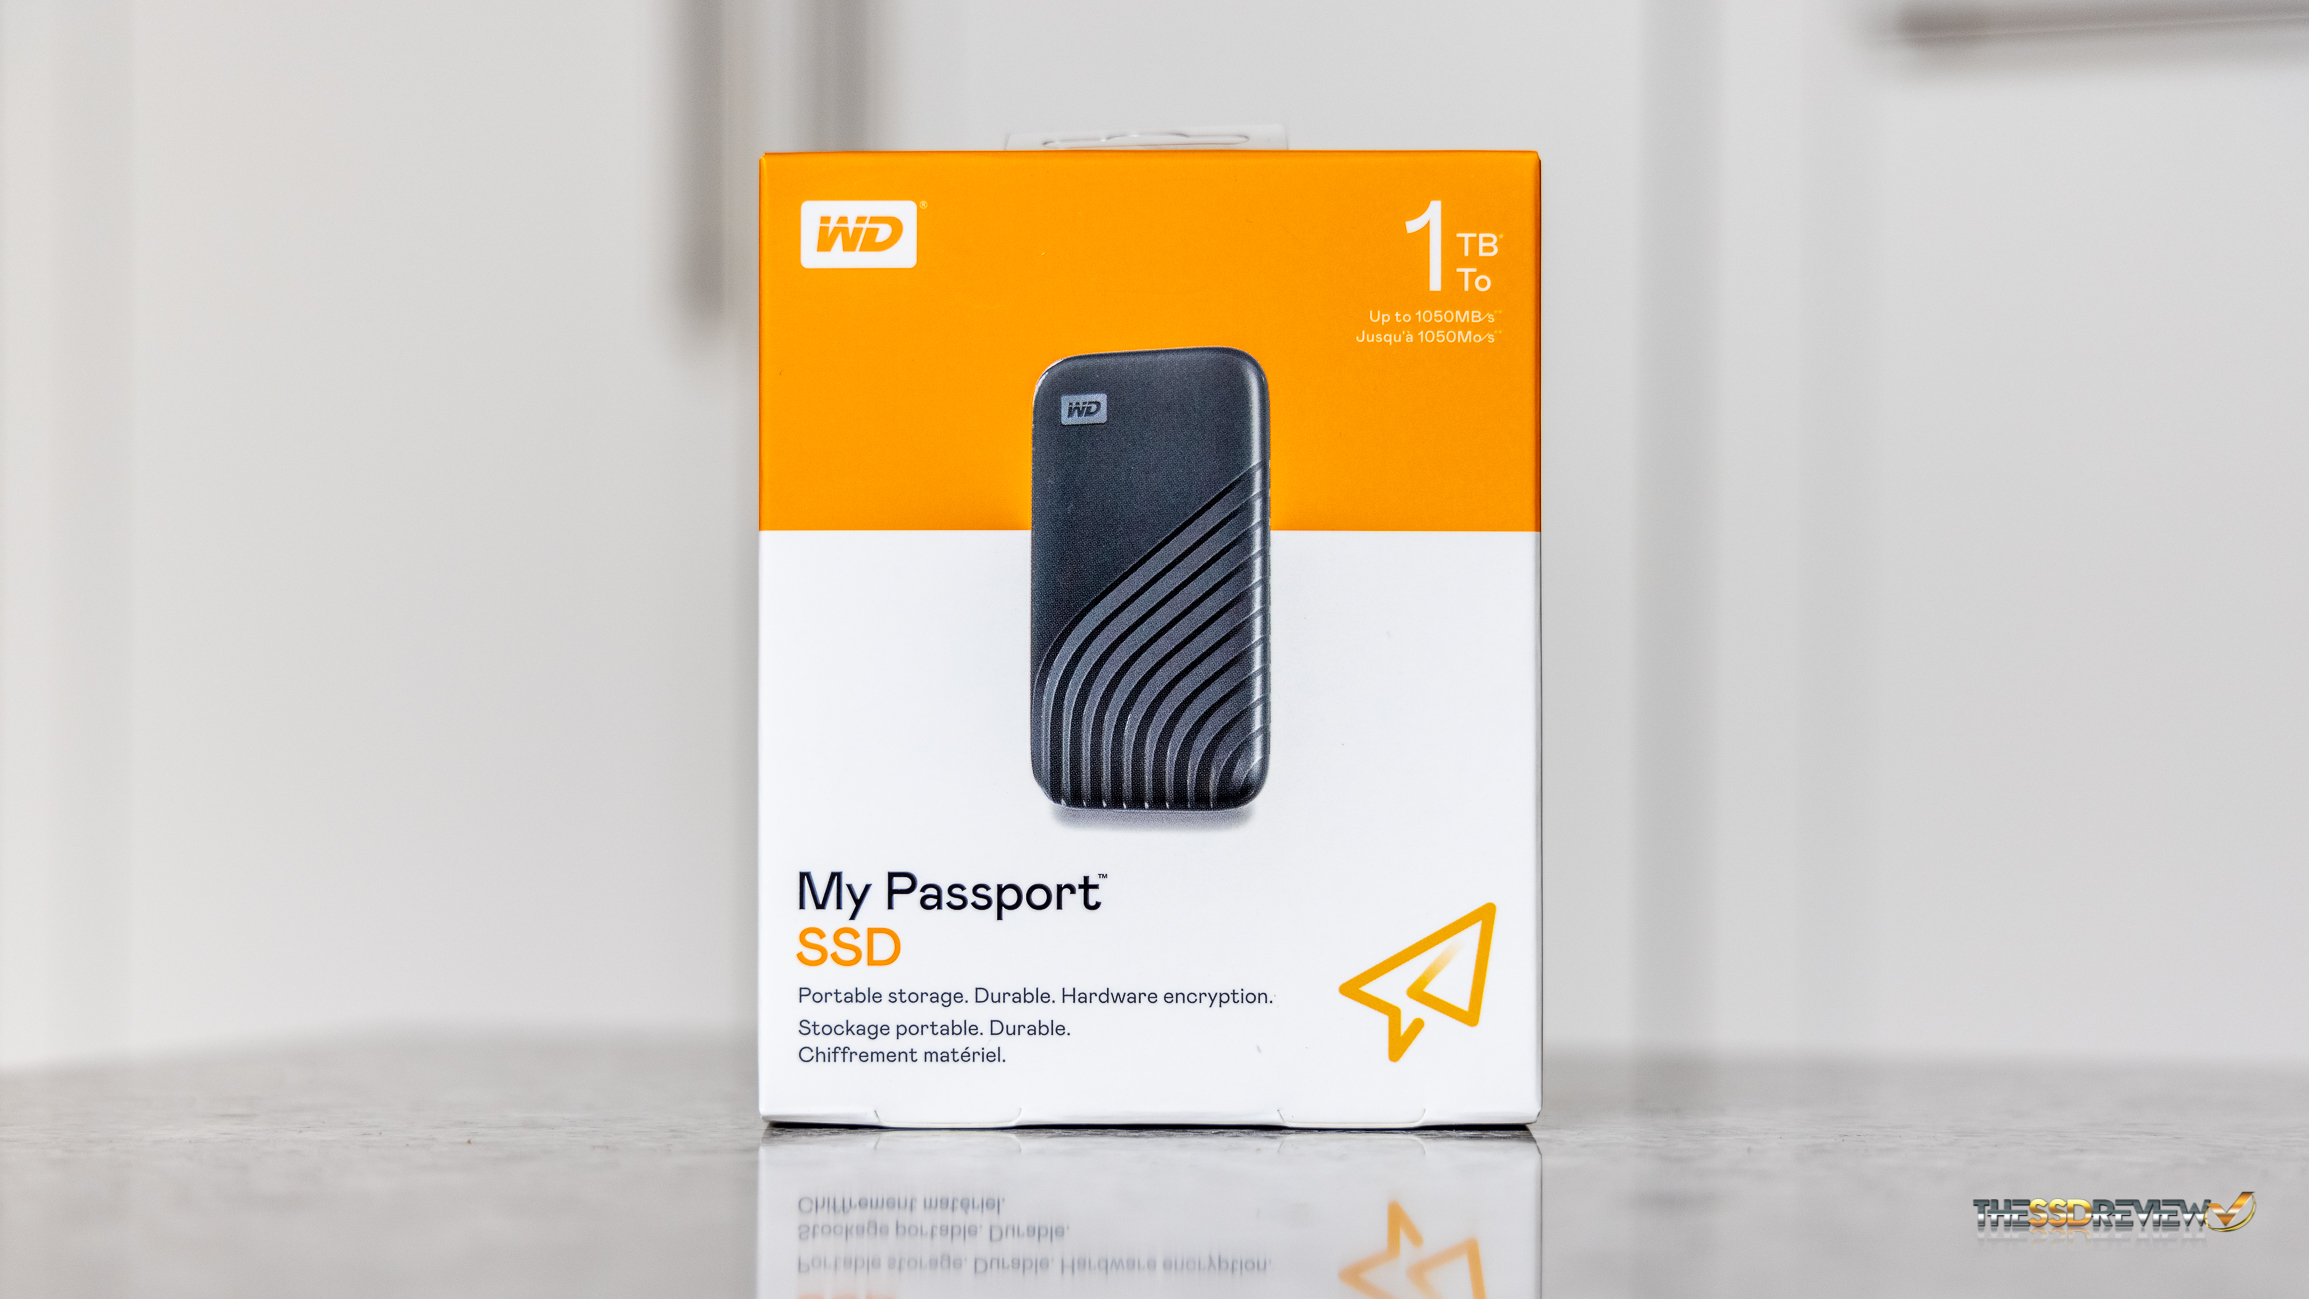 Western My Passport SSD 1TB Review - Up to 1GB/s Data Transfer with USB 3.2 | The SSD Review